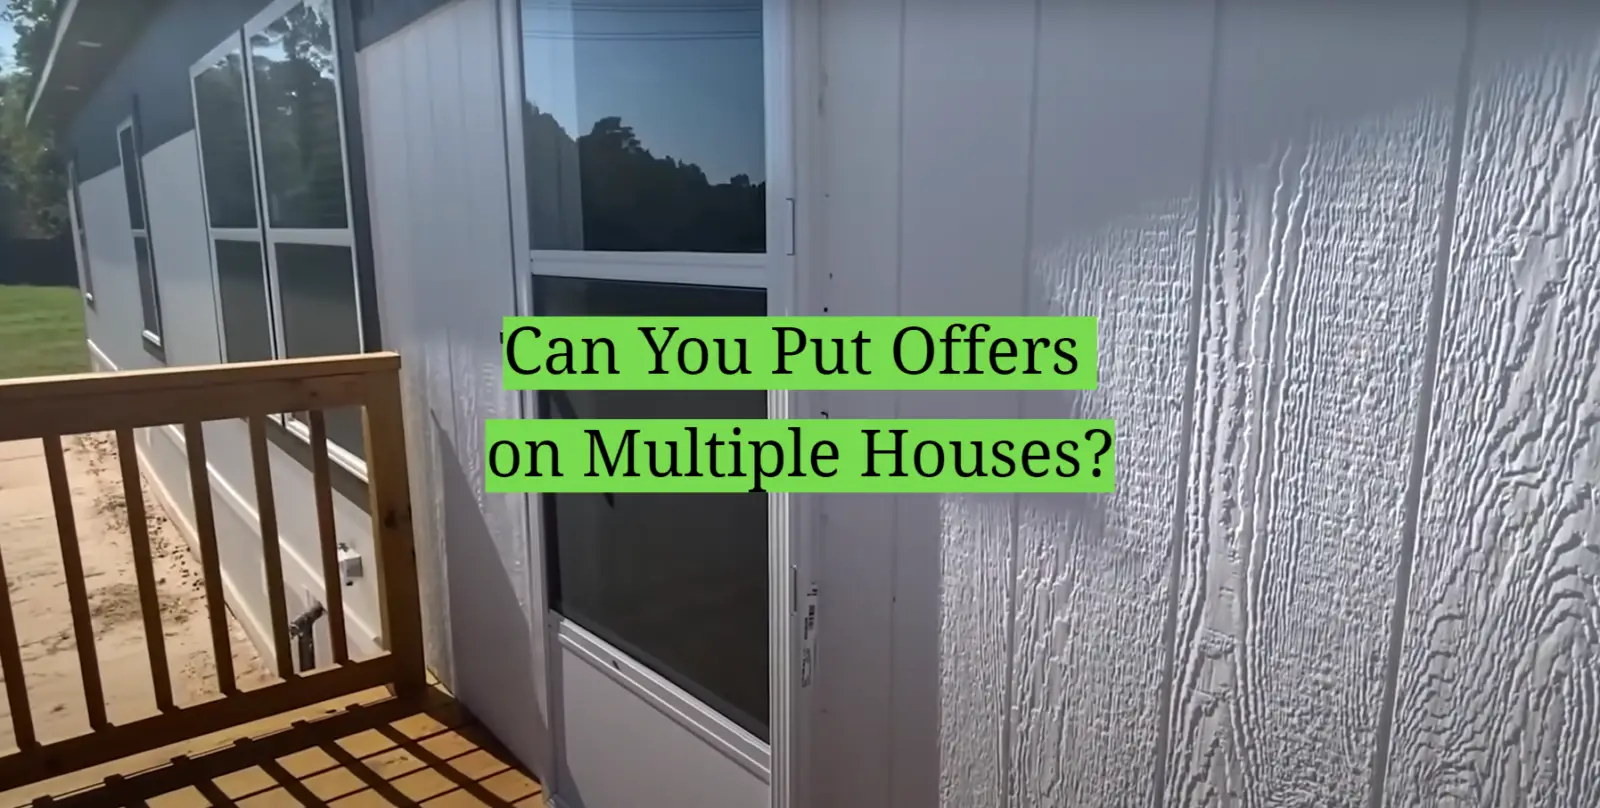 Can You Put Offers on Multiple Houses?